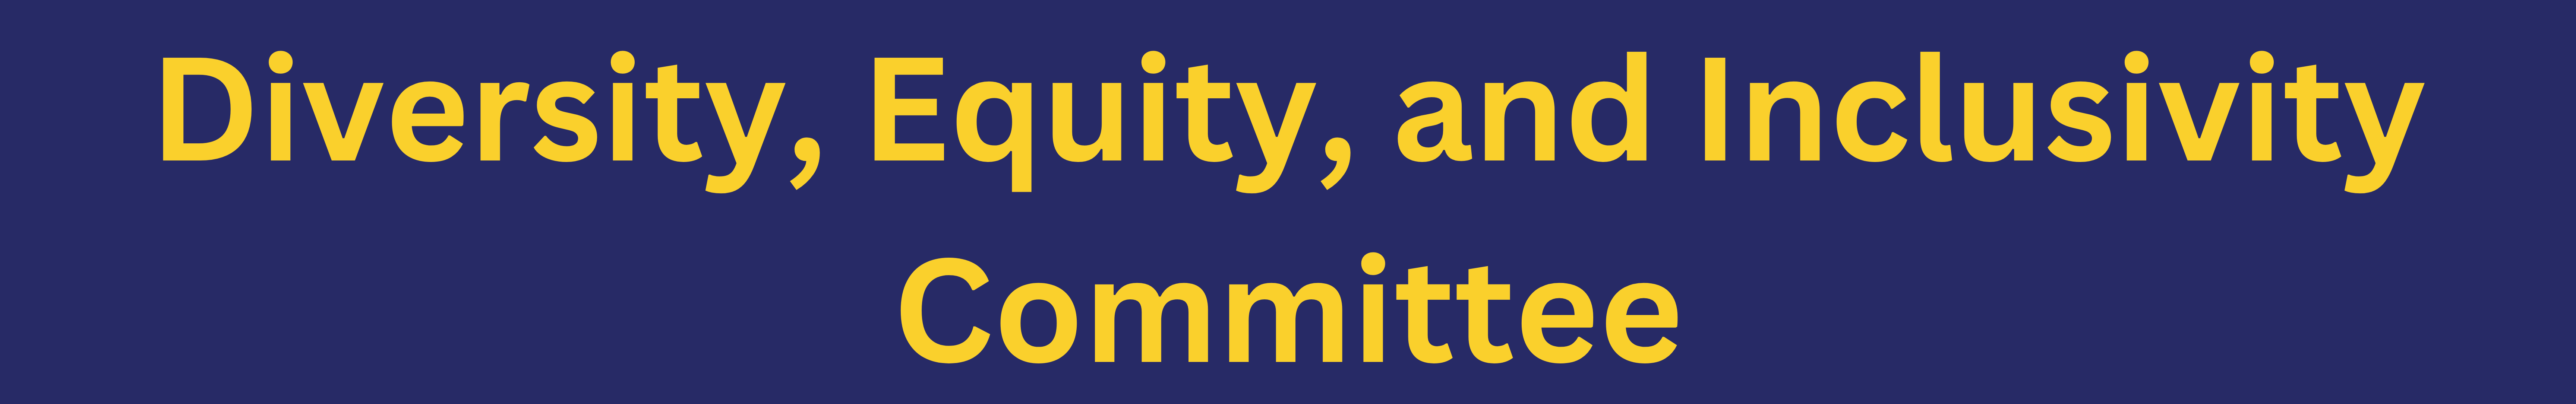 Diversity, Equity, and Inclusivity Committee